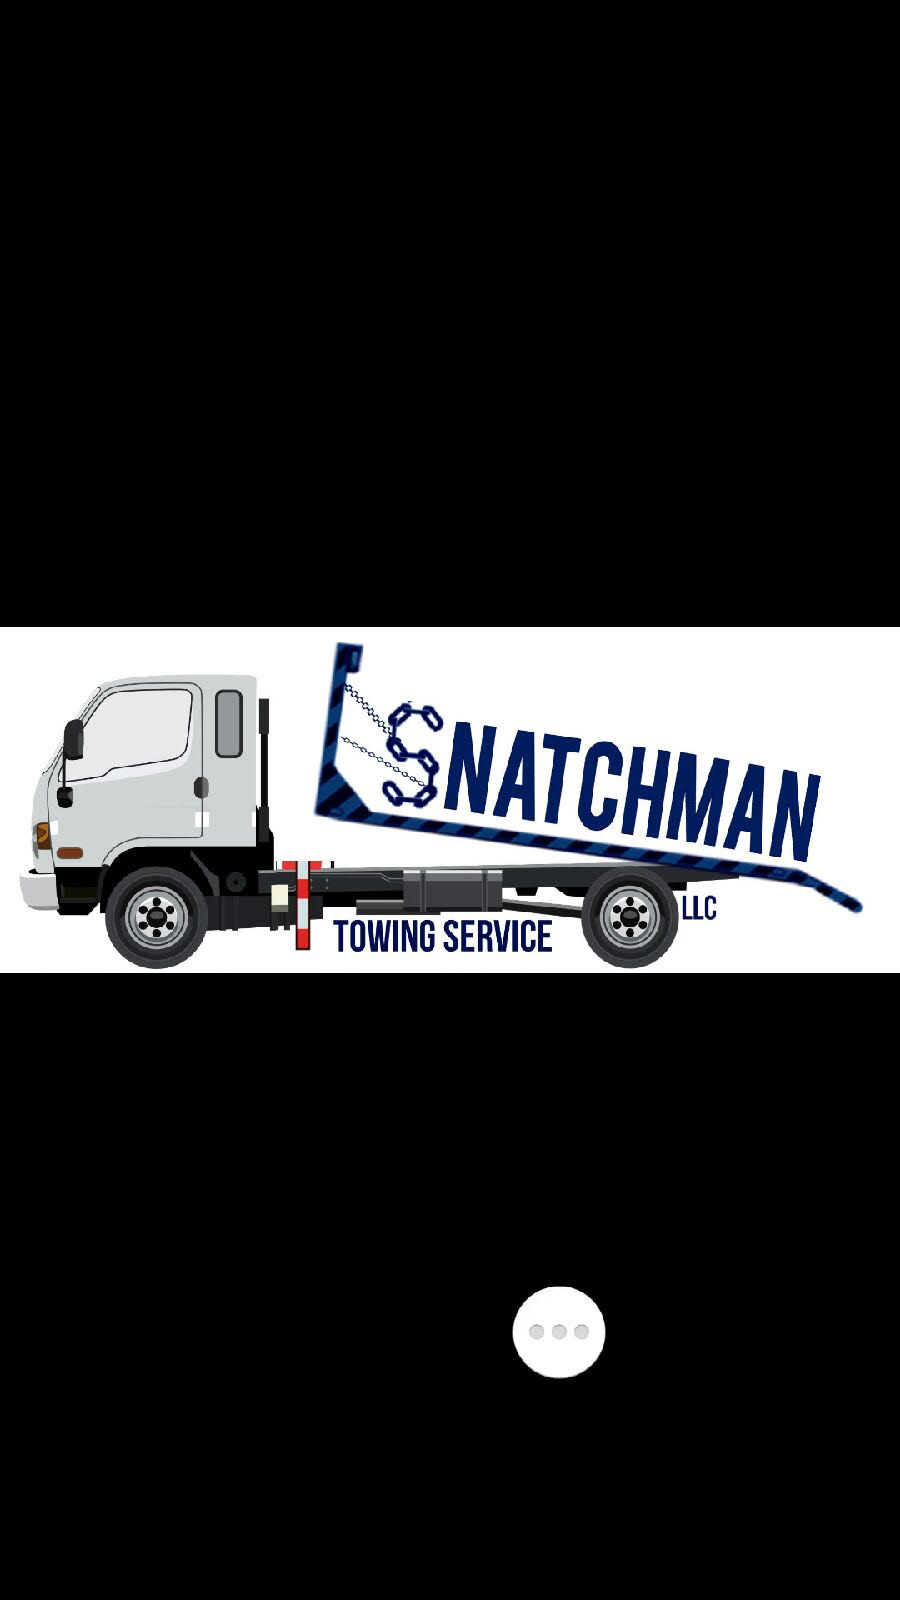 Snatchman Towing Service, LLC.